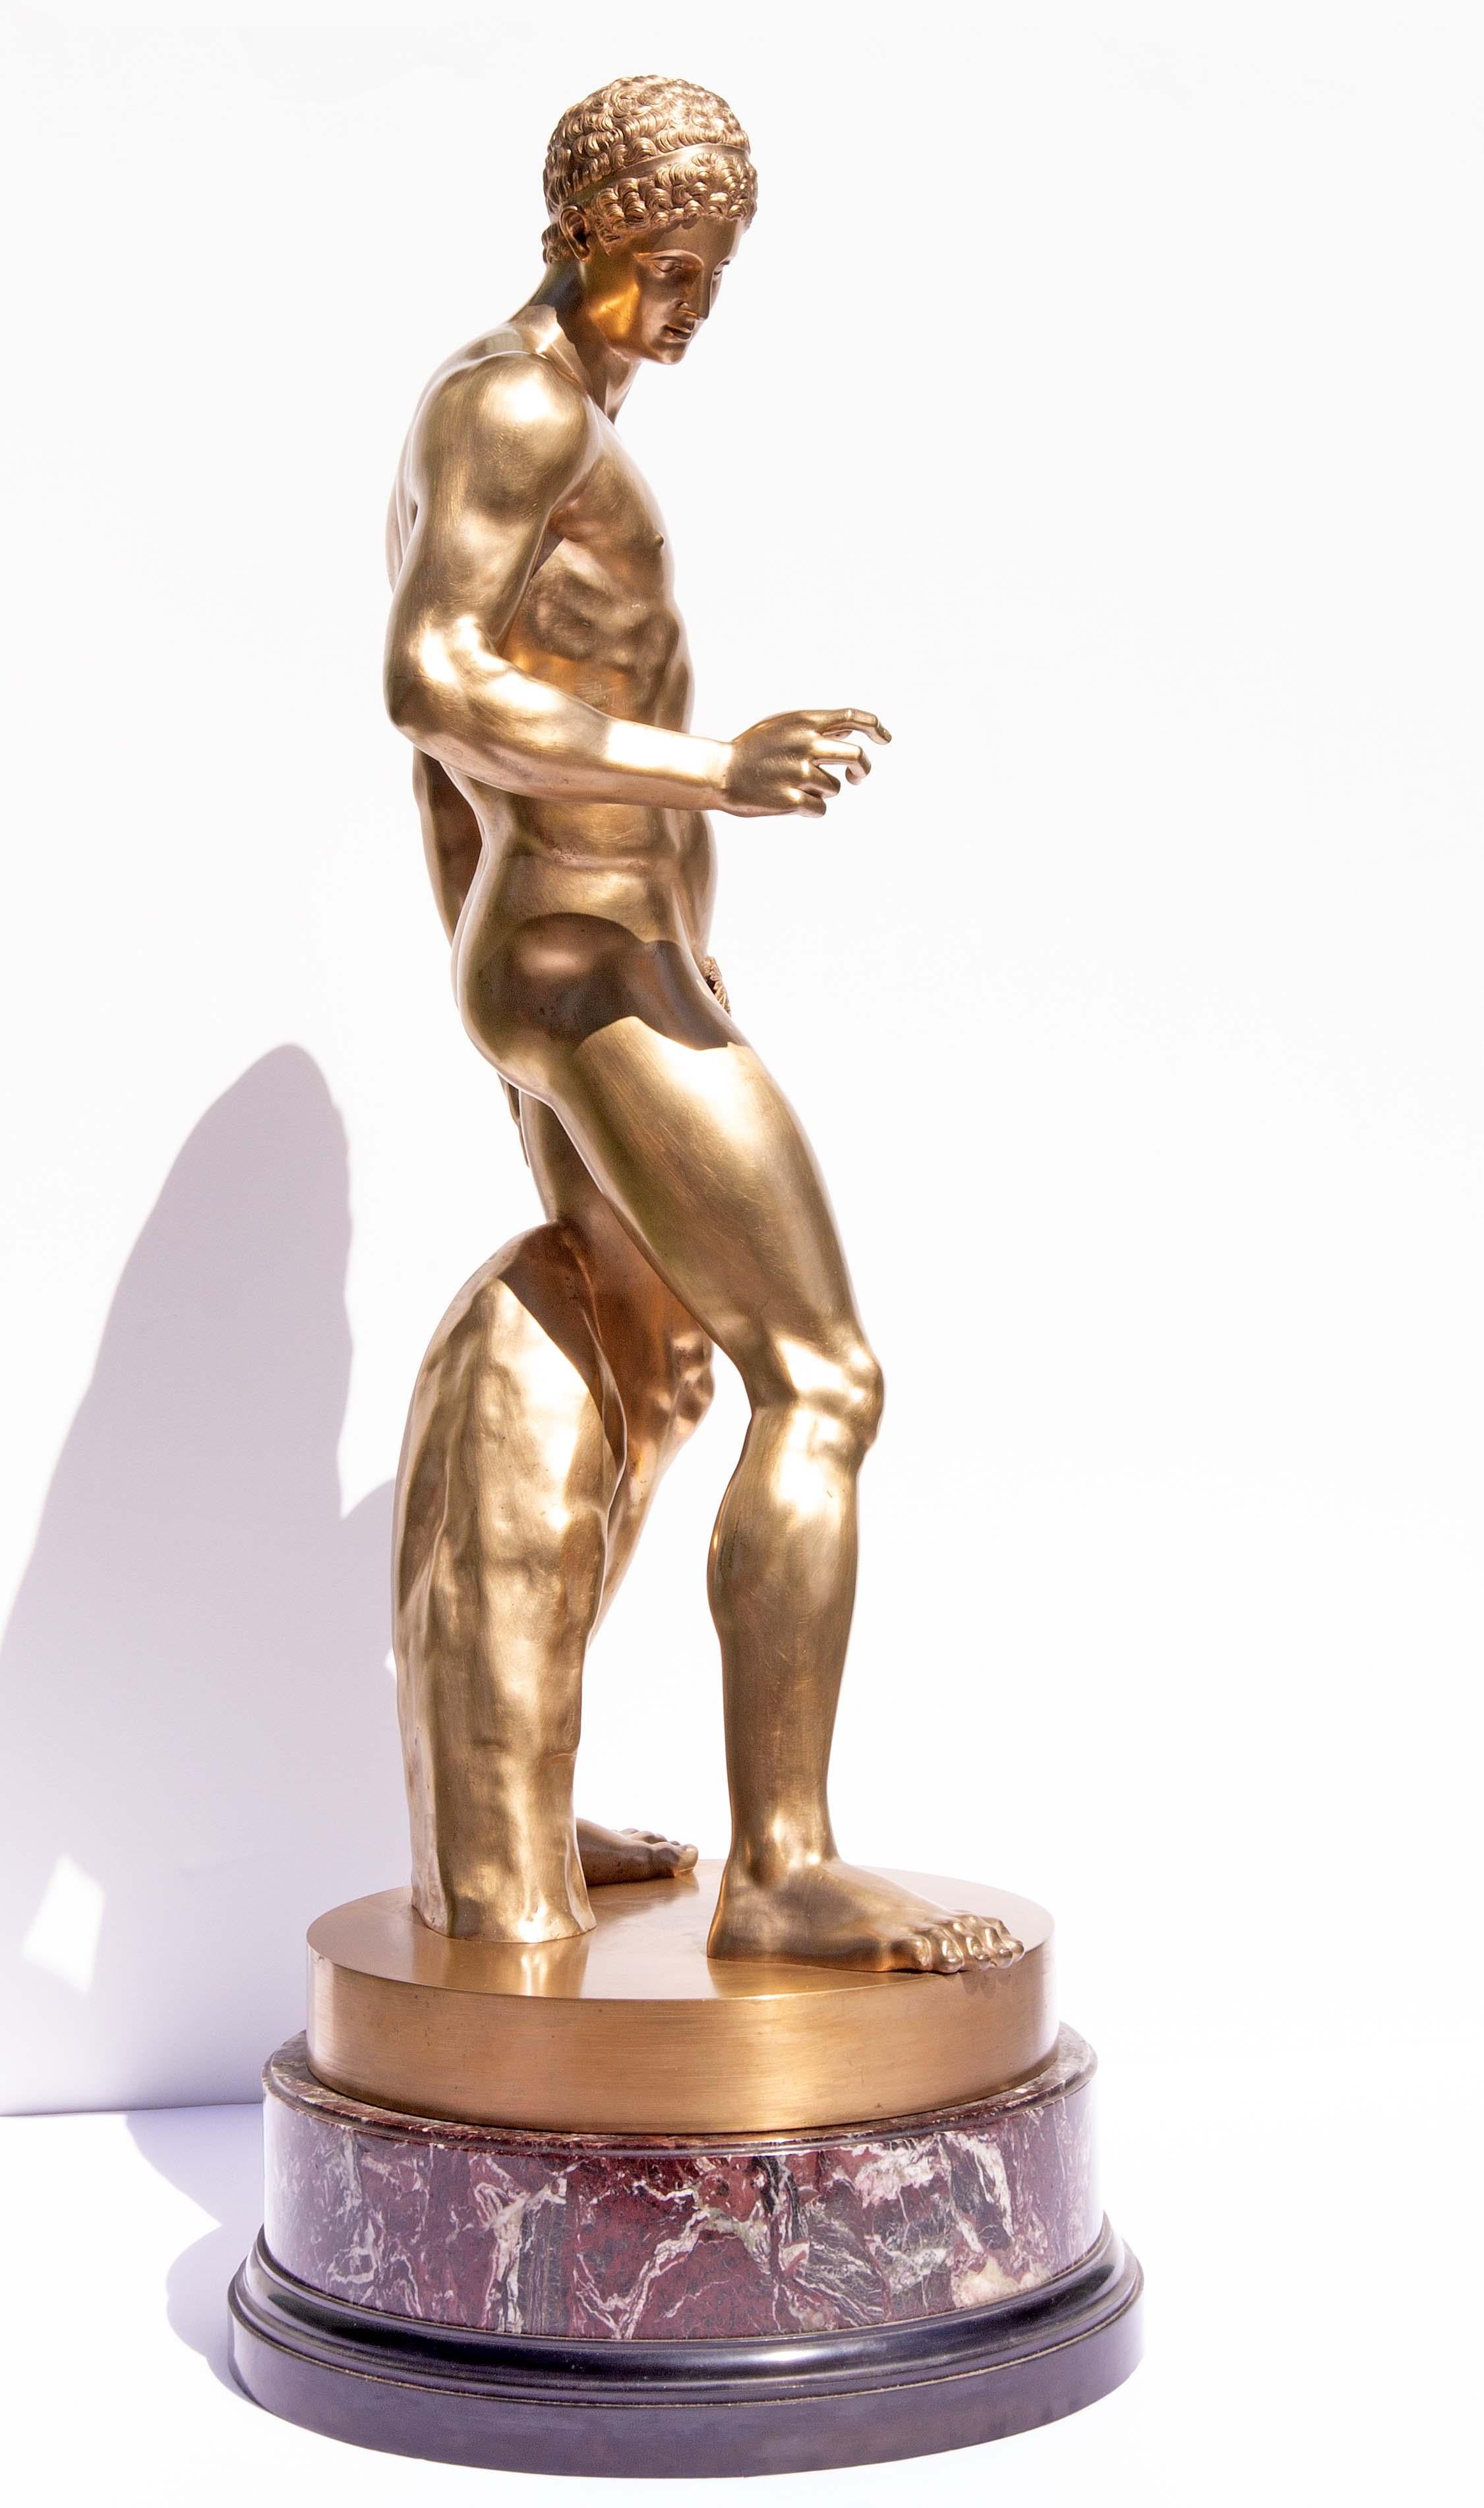 Early 20th Century Classical Nude Male Bronze Sculpture Discus Bearer After Polyclitus Grand Tour